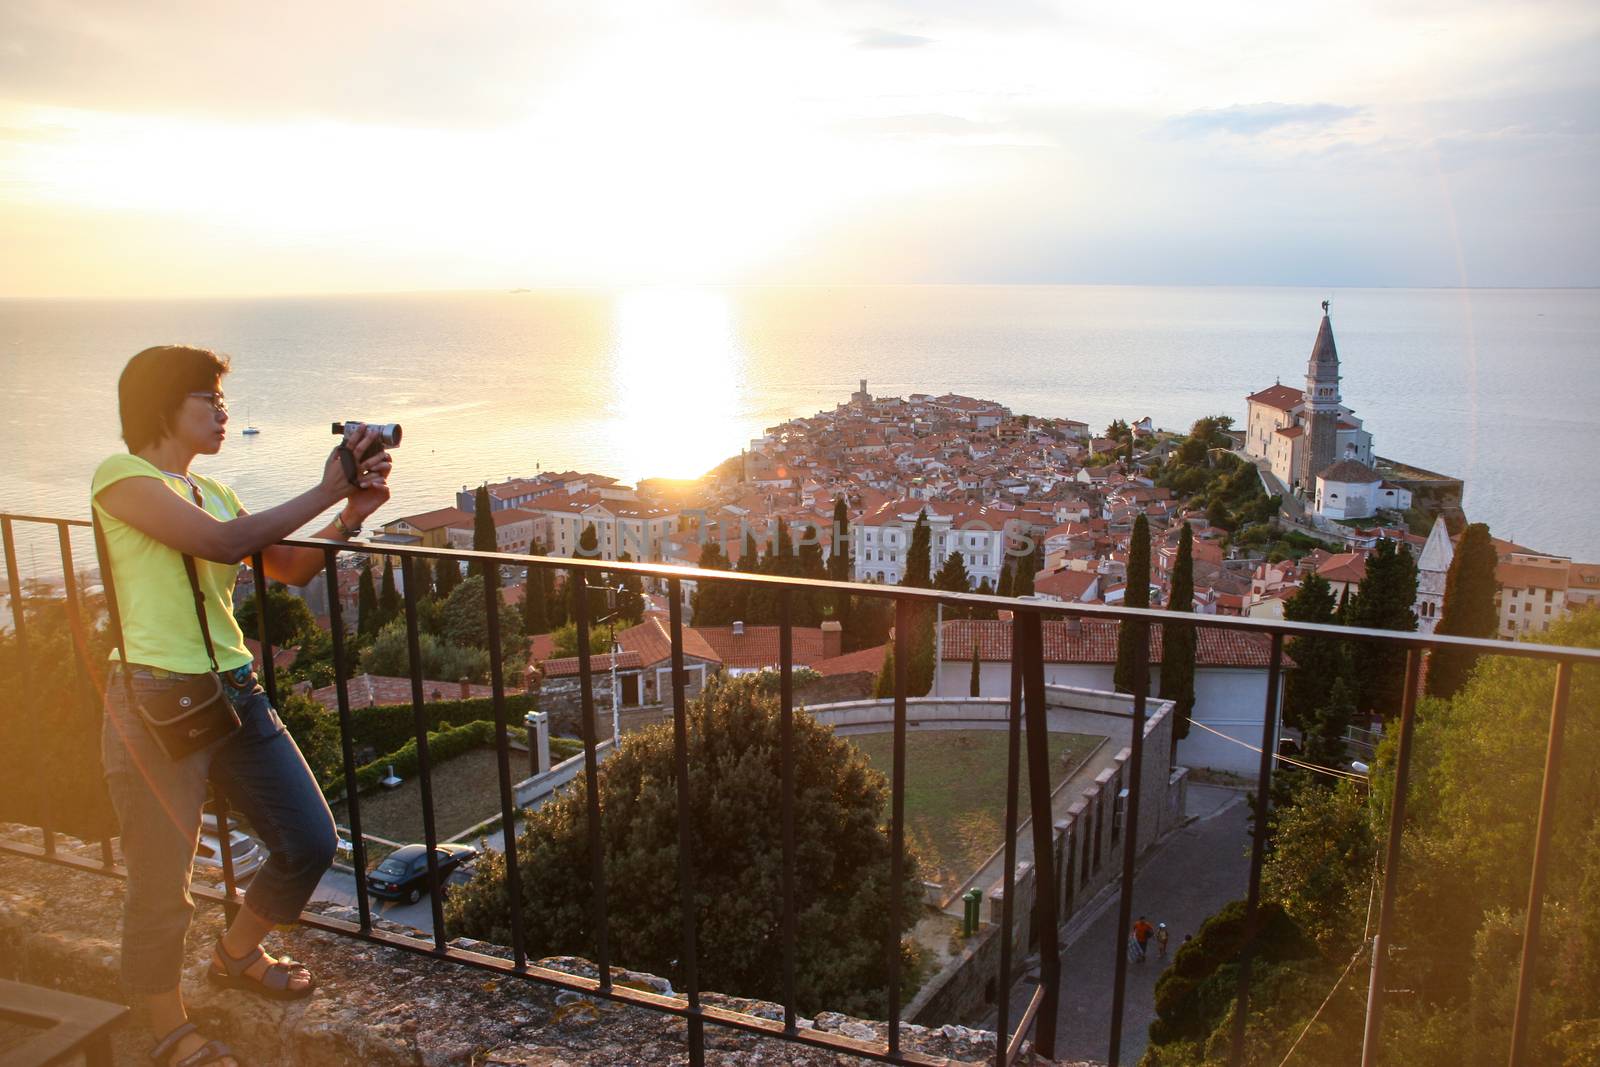 Girl with camera looking on a panoramic scene above Piran.